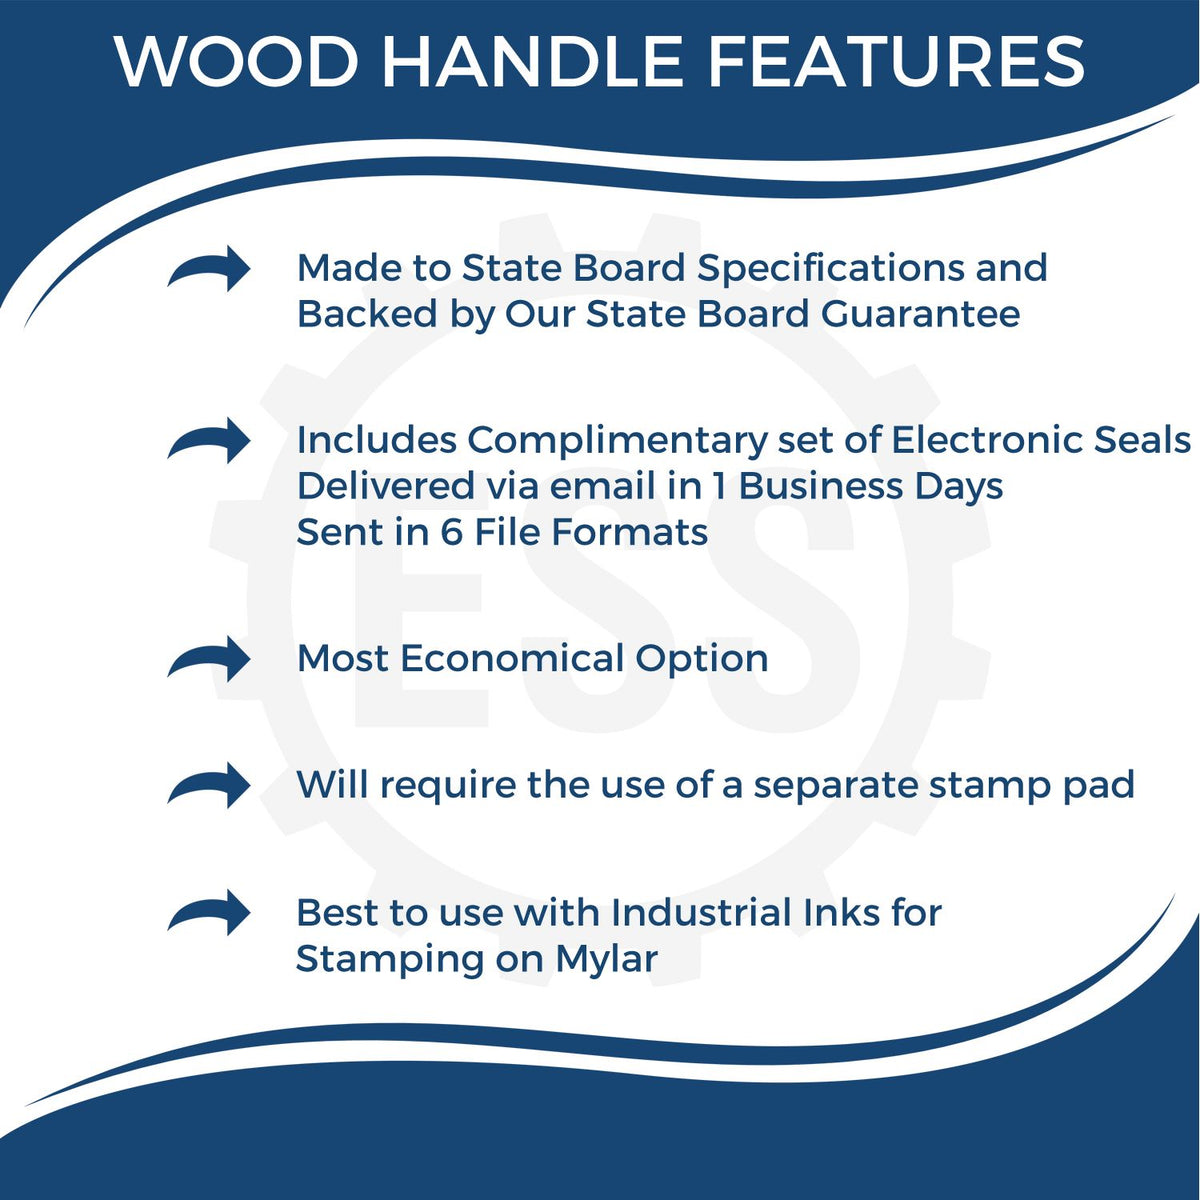 A picture of an infographic highlighting the selling points for the Wooden Handle Idaho Rectangular Notary Public Stamp